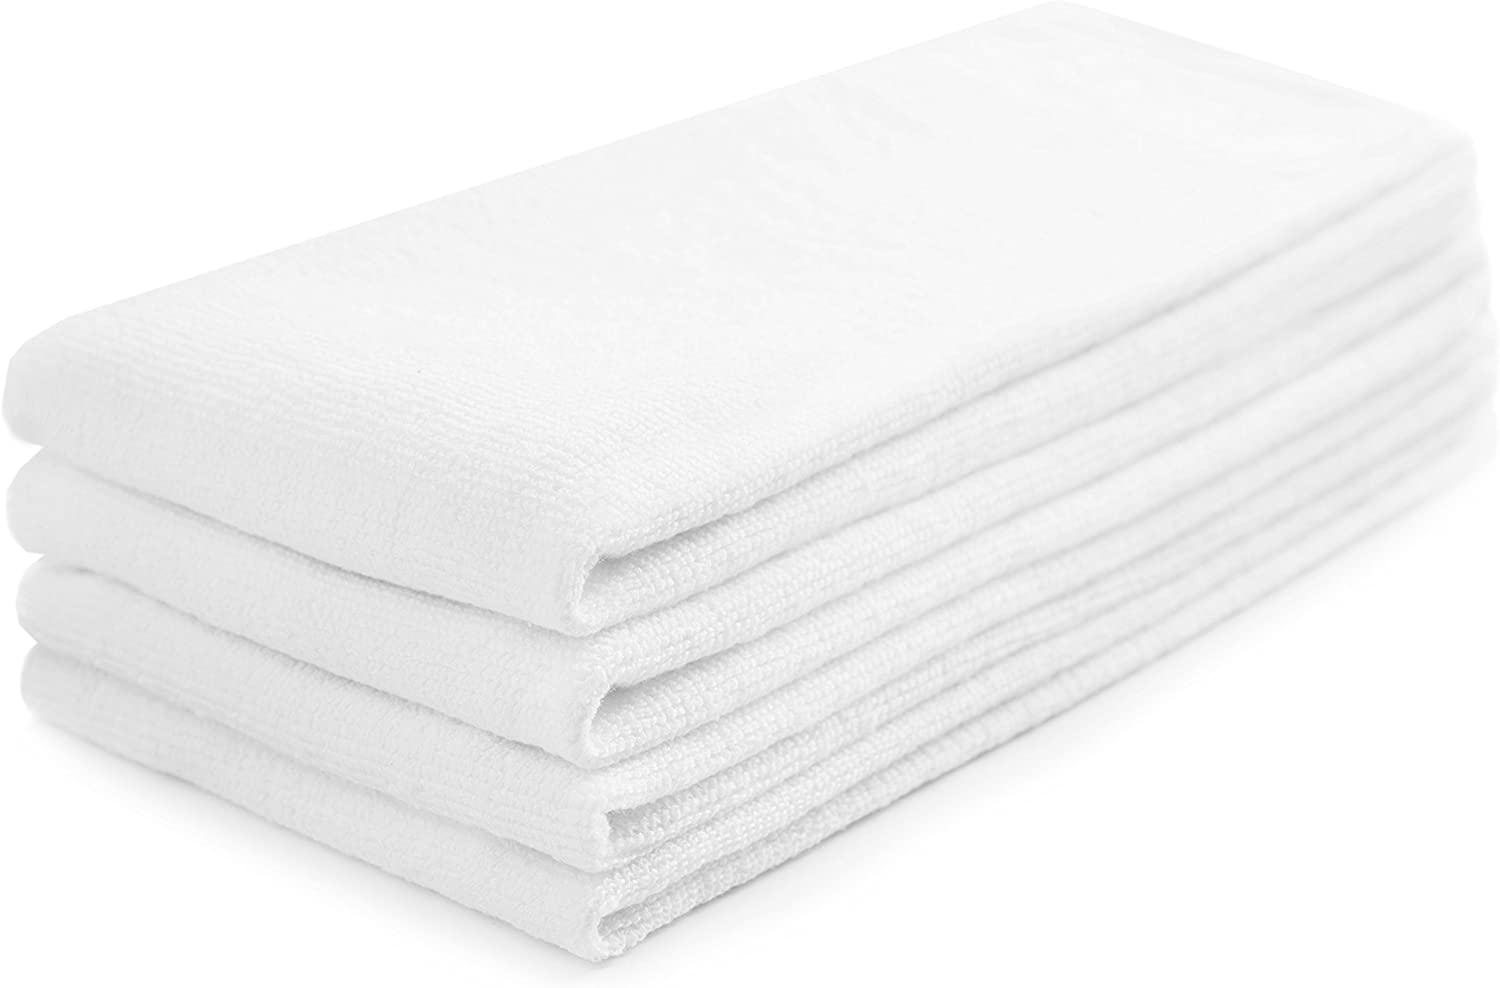 KAF Home Set of 4 Deluxe Popcorn Terry Kitchen Towels | 20 x 30 Inches |  100% Cotton Kitchen Dish Towels (White)